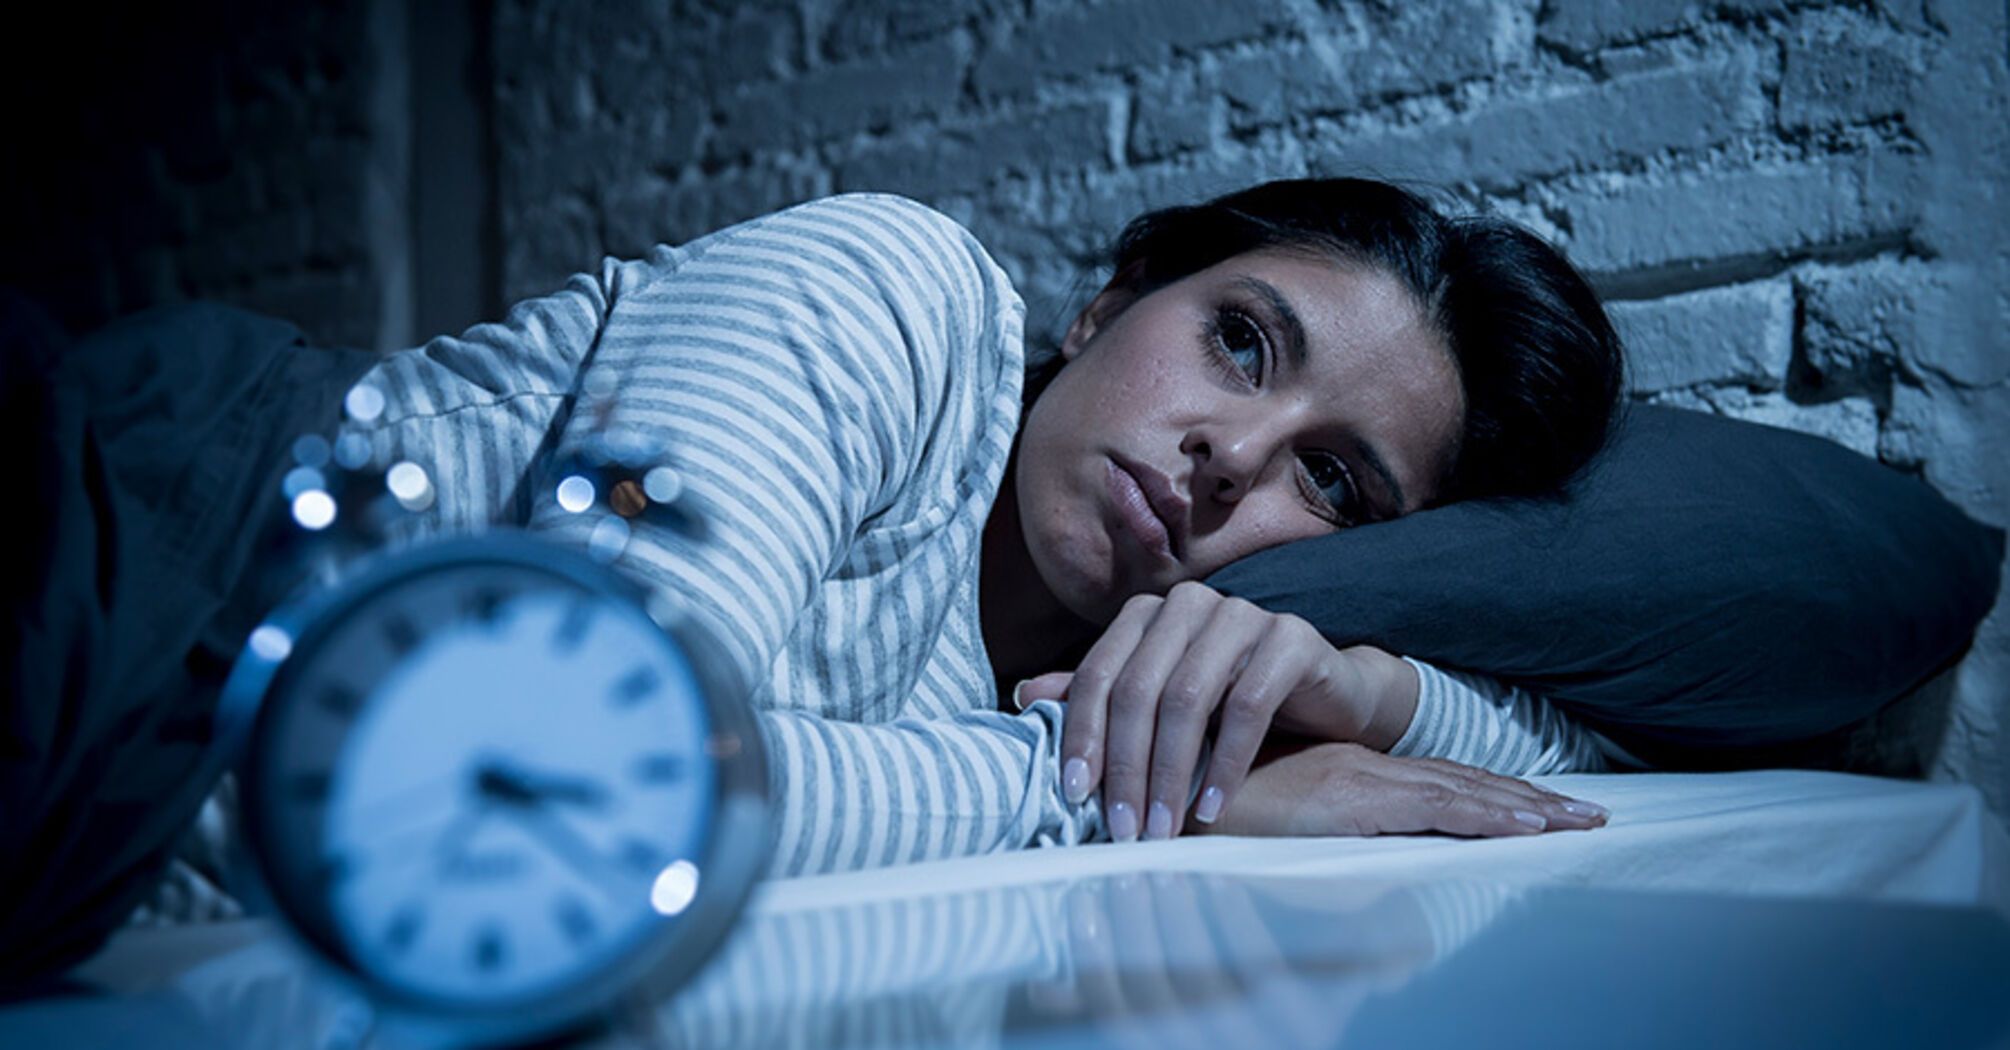 Scientists recommend consuming two ingredients against insomnia